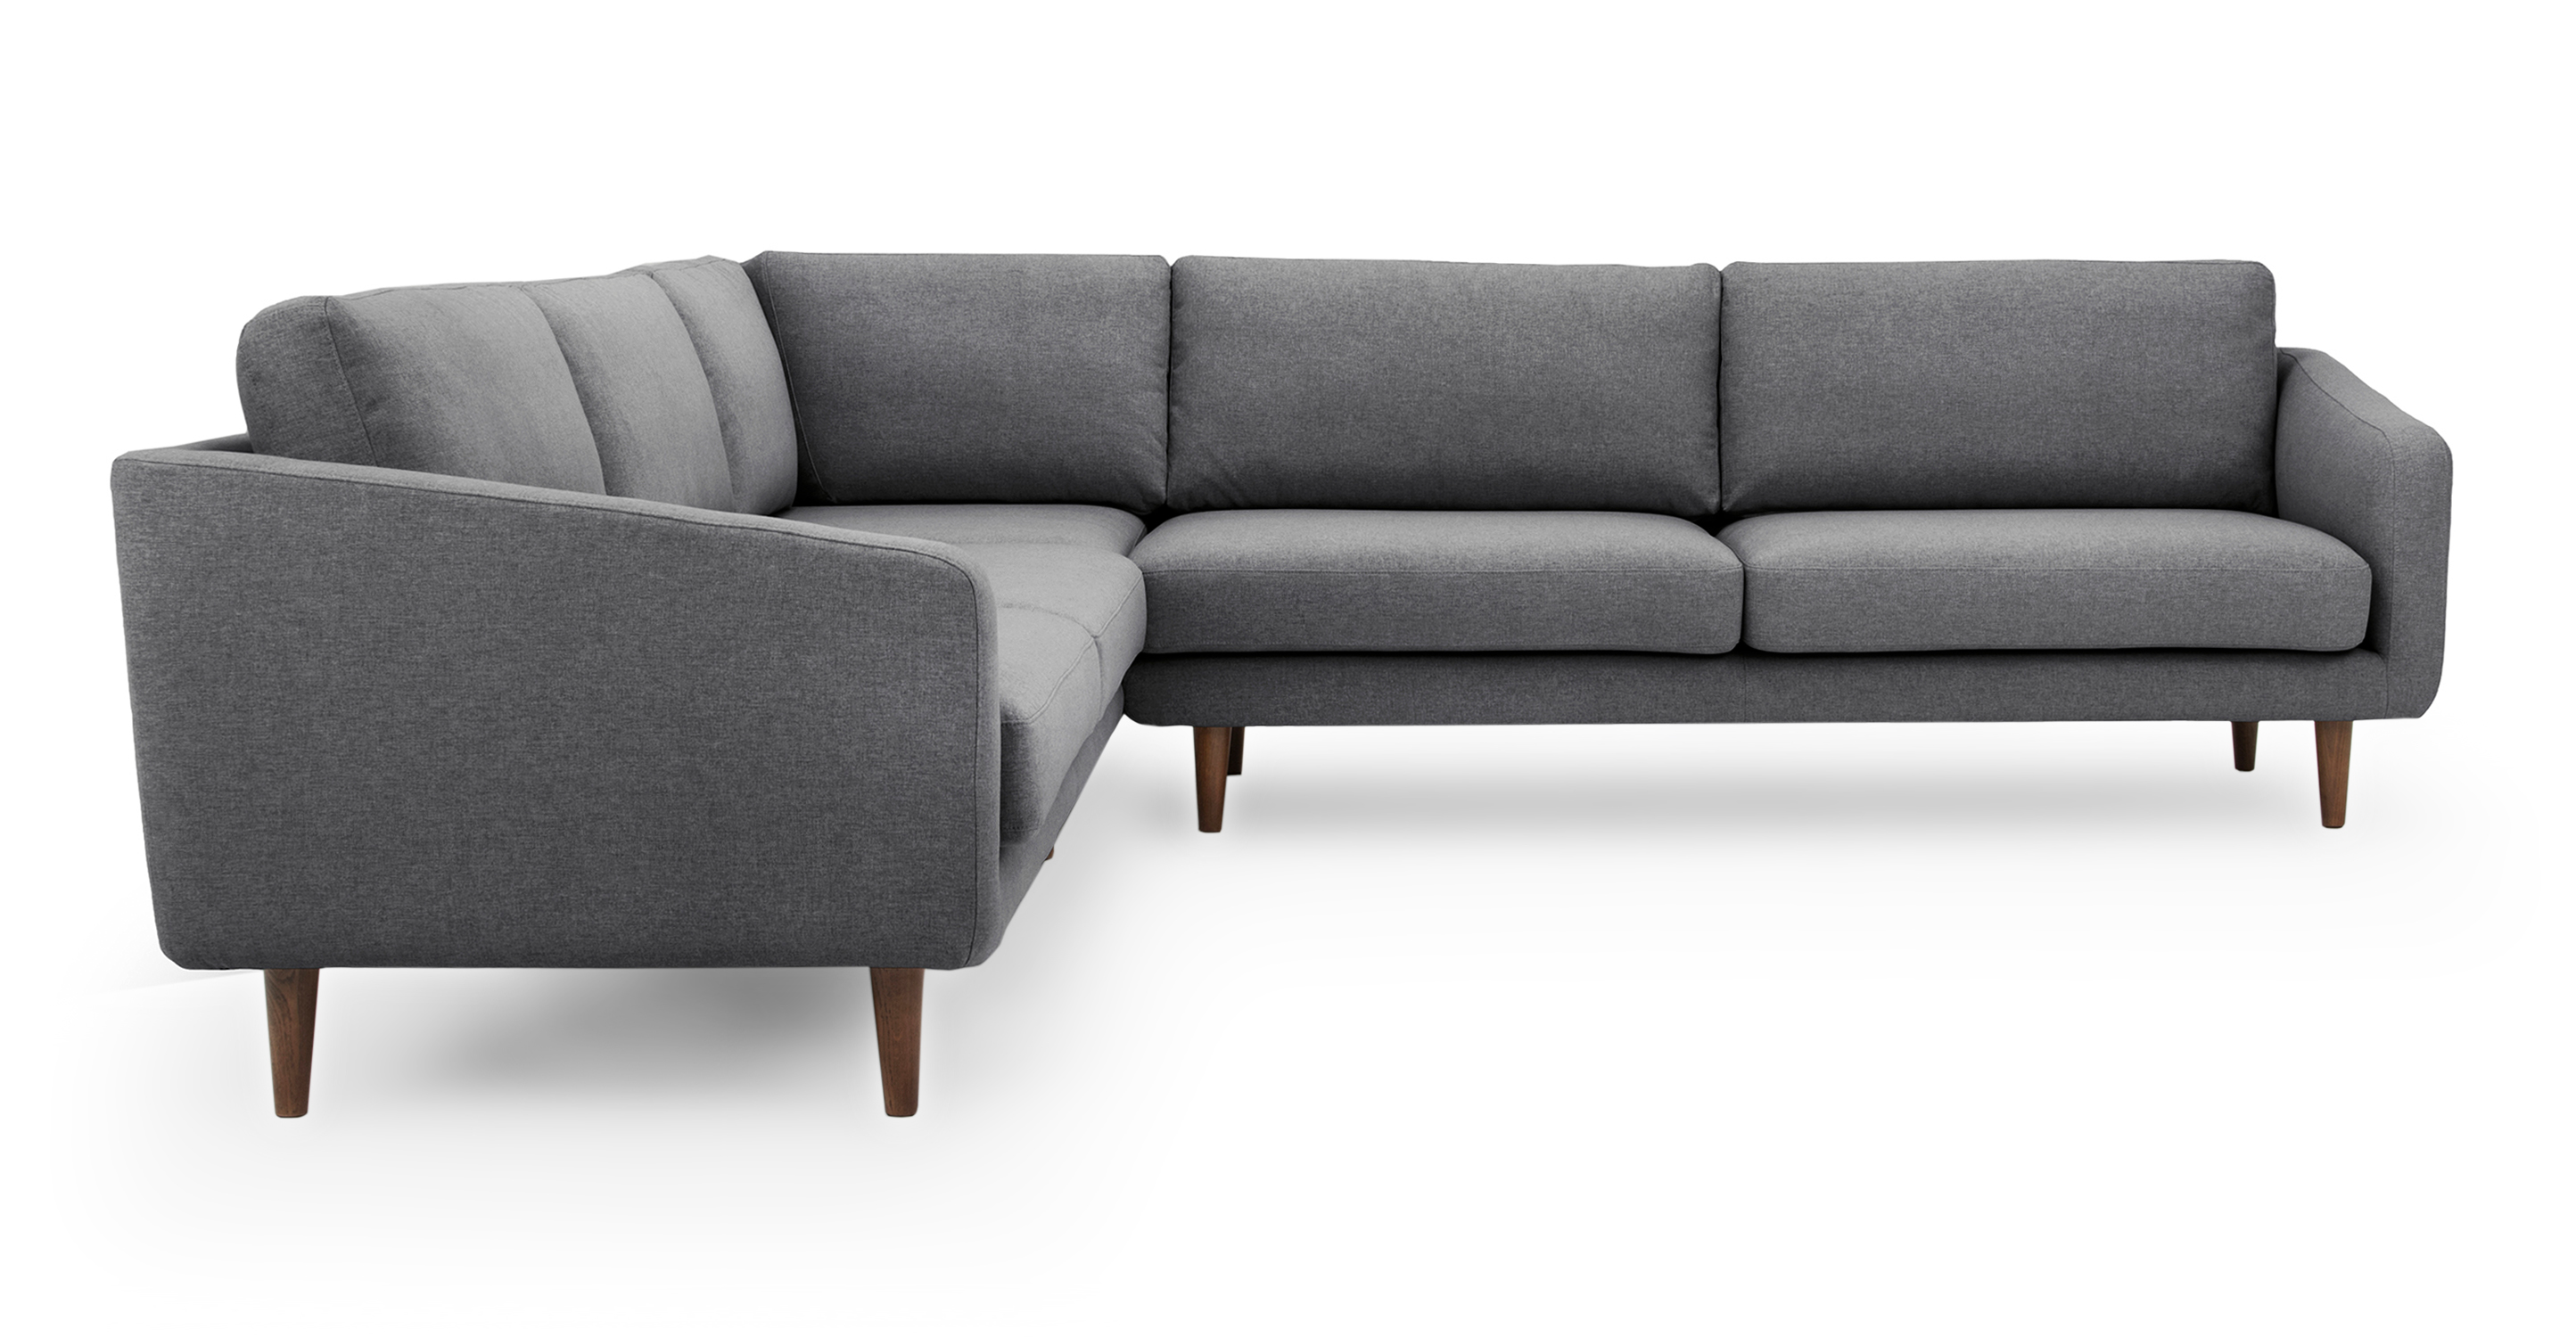 Burnham is a modern 3 piece corner sectional in dark grey fabric. The sectional is fully upholstered and has forward sloping arms. Both back and seat cushions are removable. The sectional is lifted on Walnut stained legs, creating space underneath for storage. (Facing side)